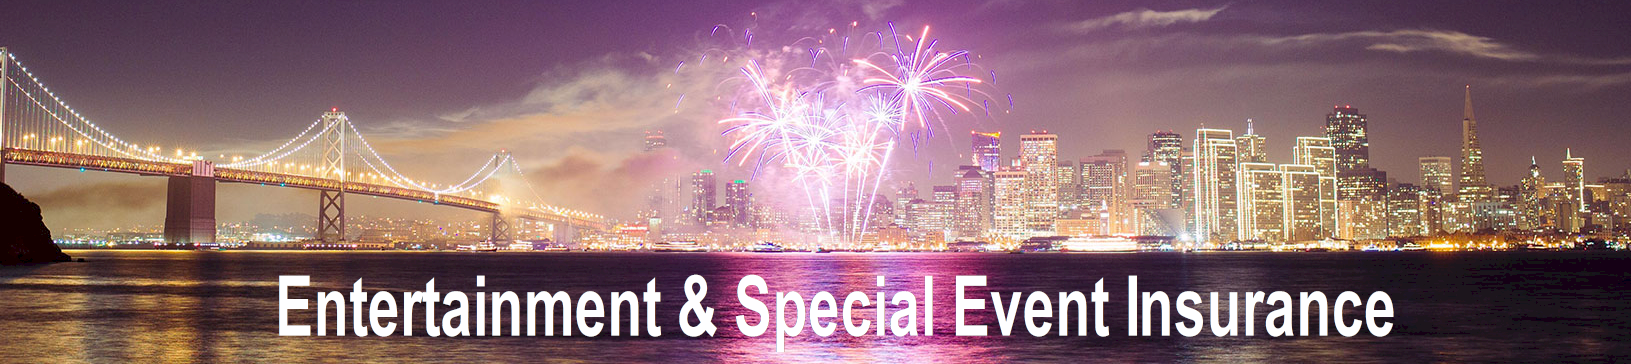 Special event insurance quote header